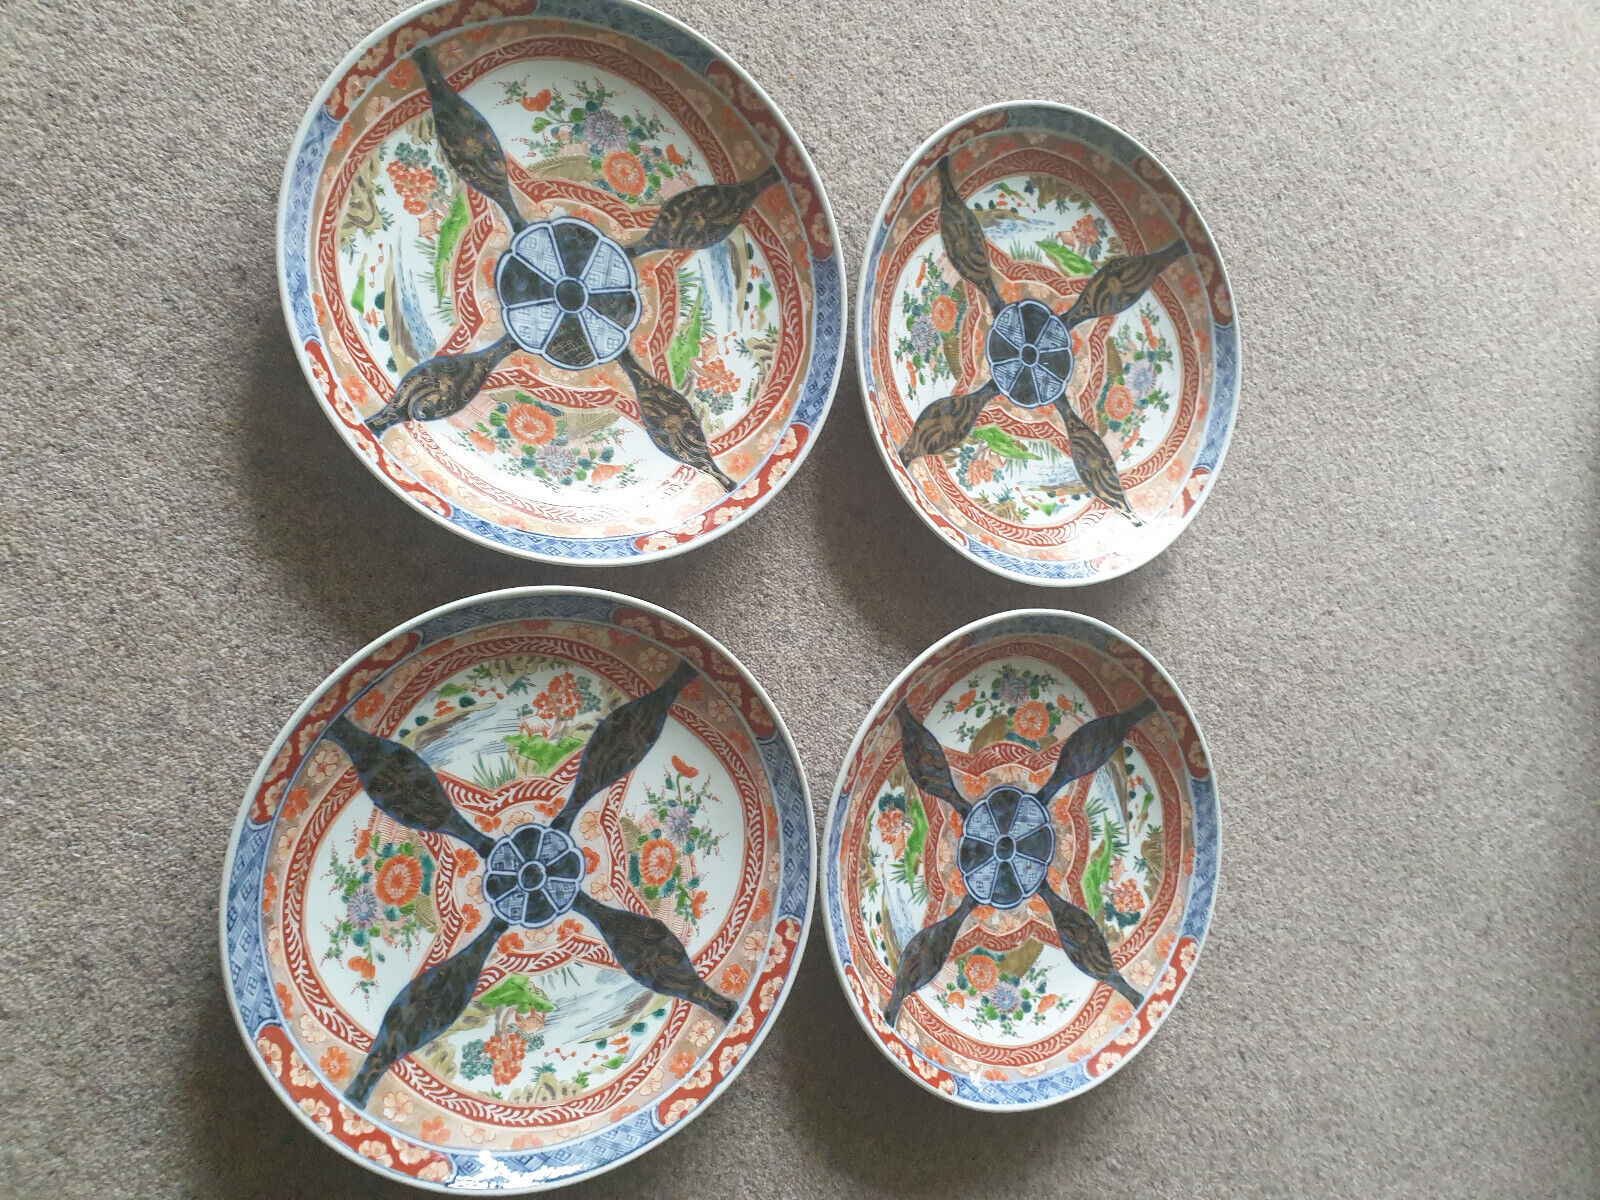 Antique Valuations: A Set of Four Matching 19th Century Imari Chargers